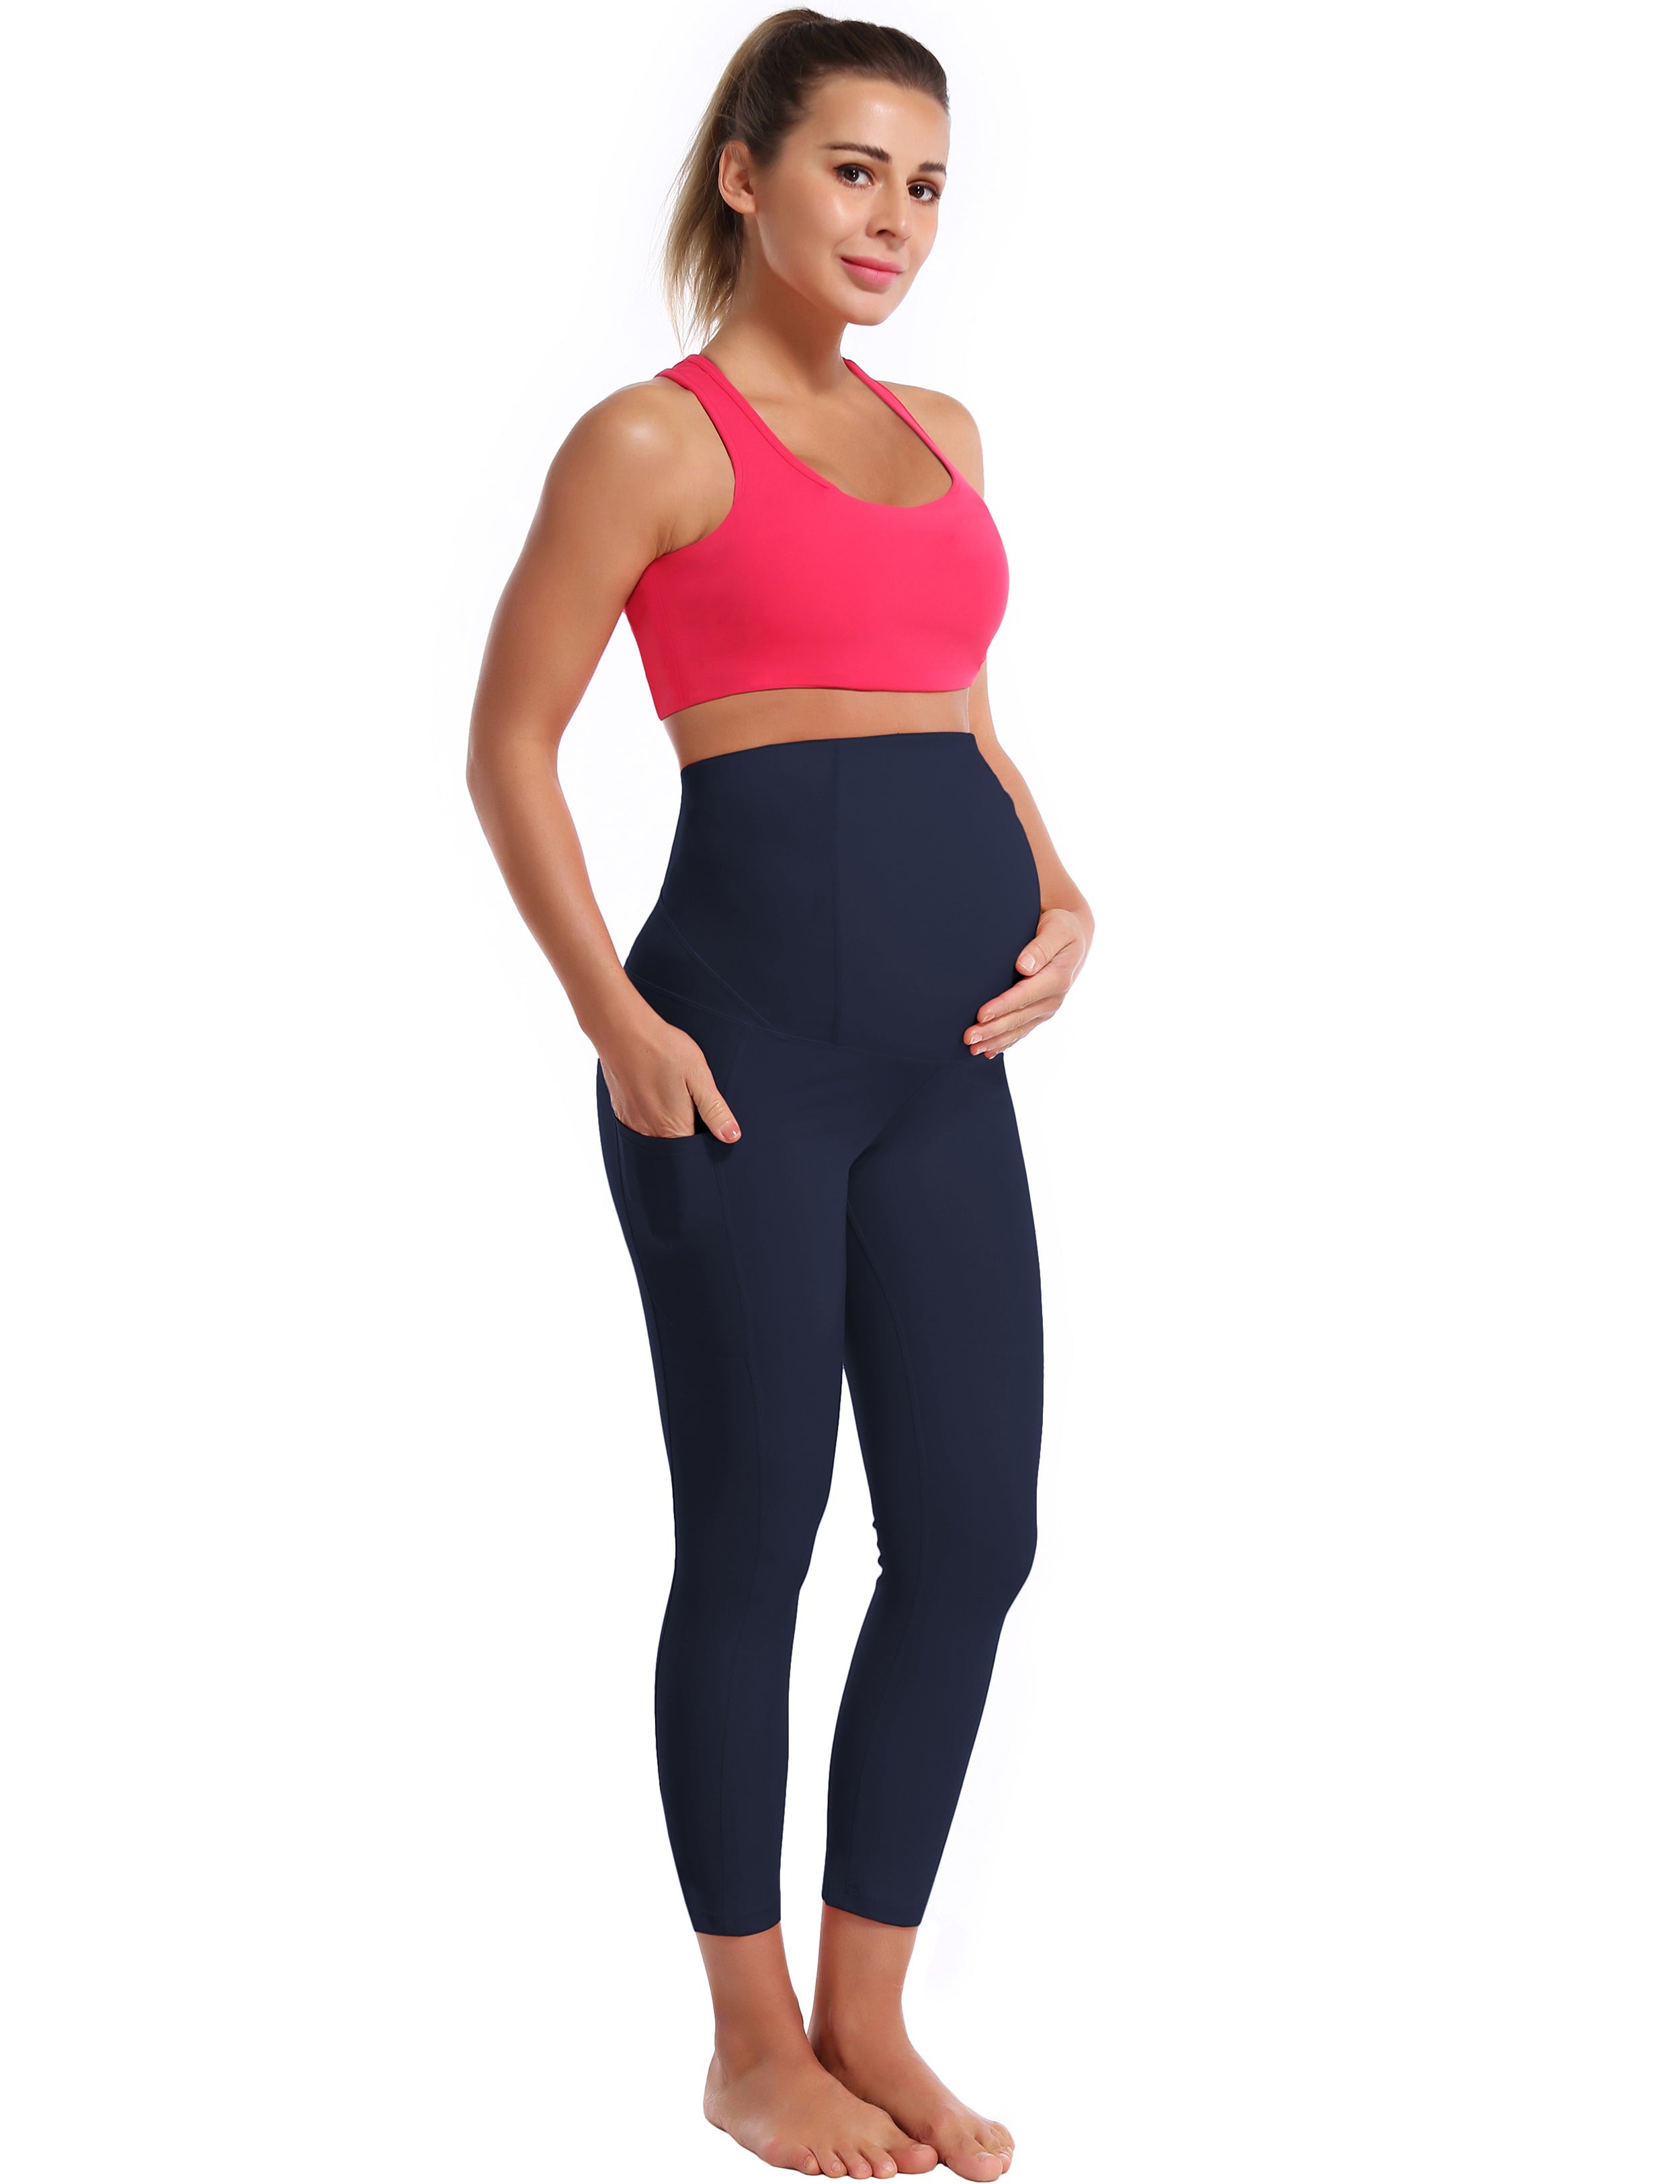 22" Side Pockets Maternity Gym Pants darknavy 87%Nylon/13%Spandex Softest-ever fabric High elasticity 4-way stretch Fabric doesn't attract lint easily No see-through Moisture-wicking Machine wash